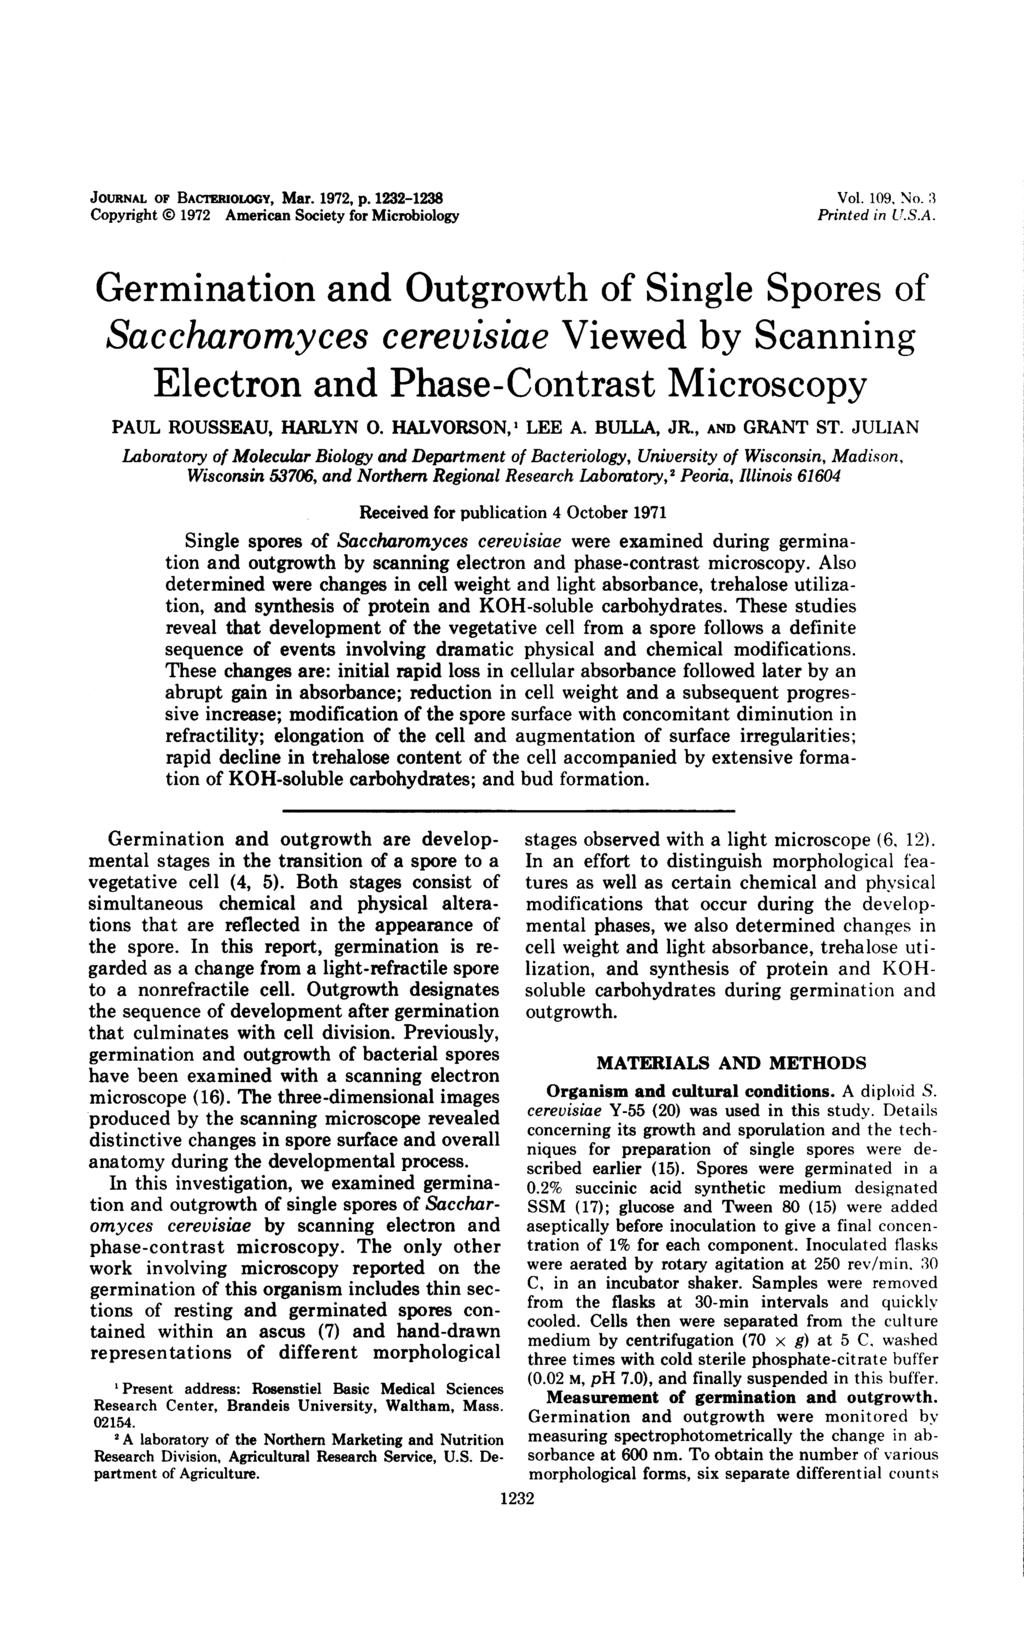 JOURNAL OF BACTrIOLOoY, Mar. 1972, p. 1232-1238 Copyright 0) 1972 American Society for Microbiology Vol. 109, No. 3 Printed in U.S.A. Germination and Outgrowth of Single Spores of Saccharomyces cerevisiae Viewed by Scanning Electron and Phase-Contrast Microscopy PAUL ROUSSEAU, HARLYN 0.